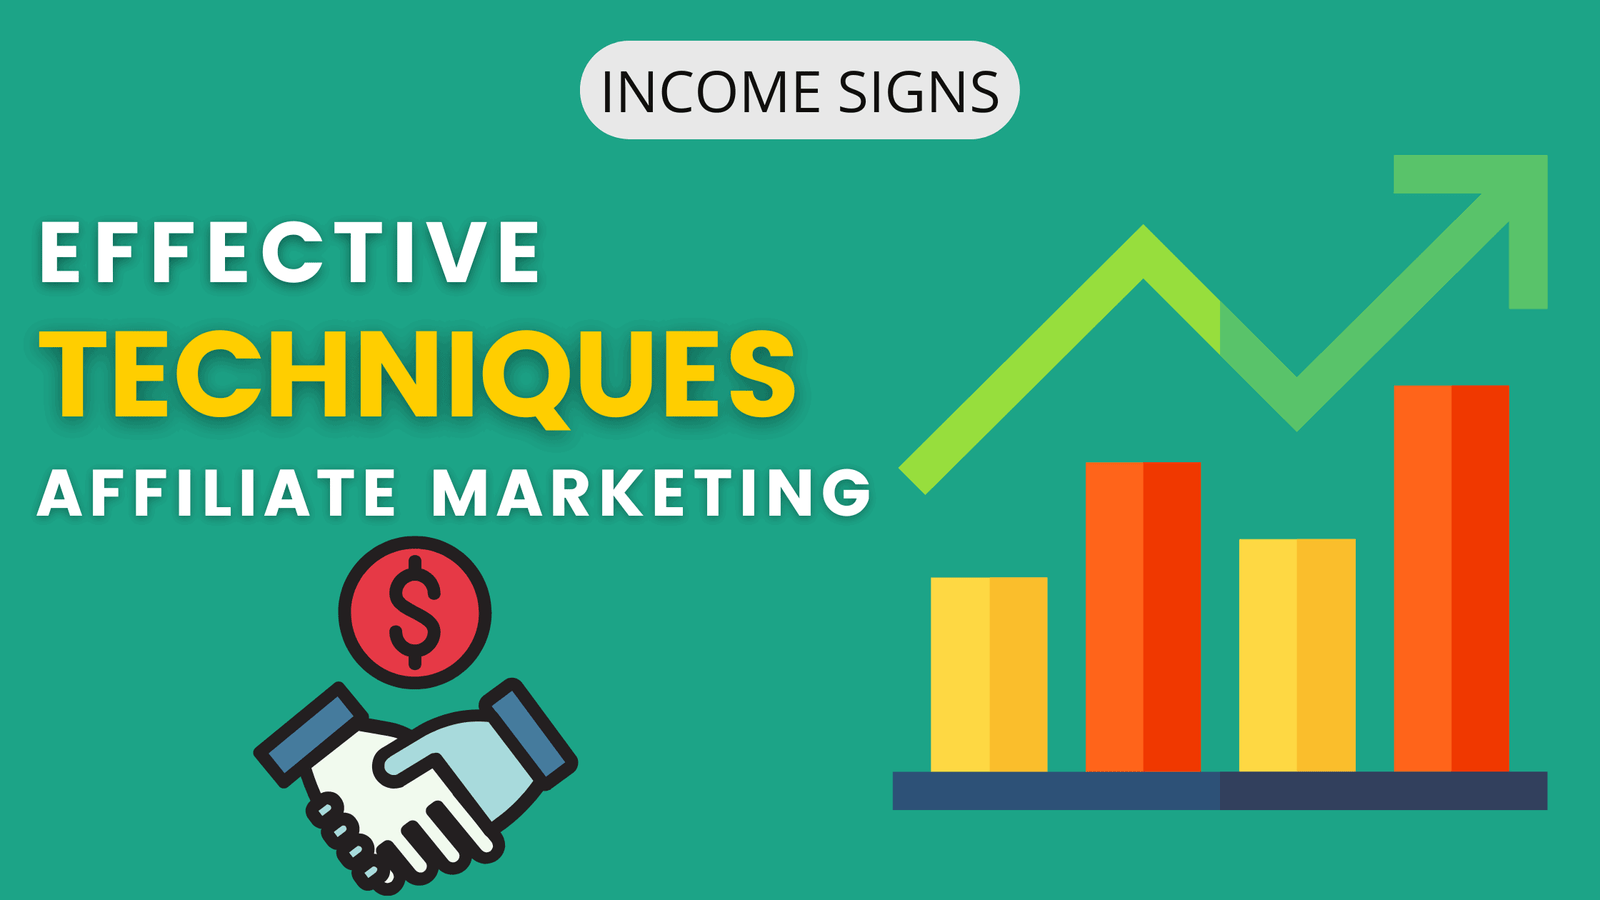 Effective Marketing Techniques for Affiliate Marketing